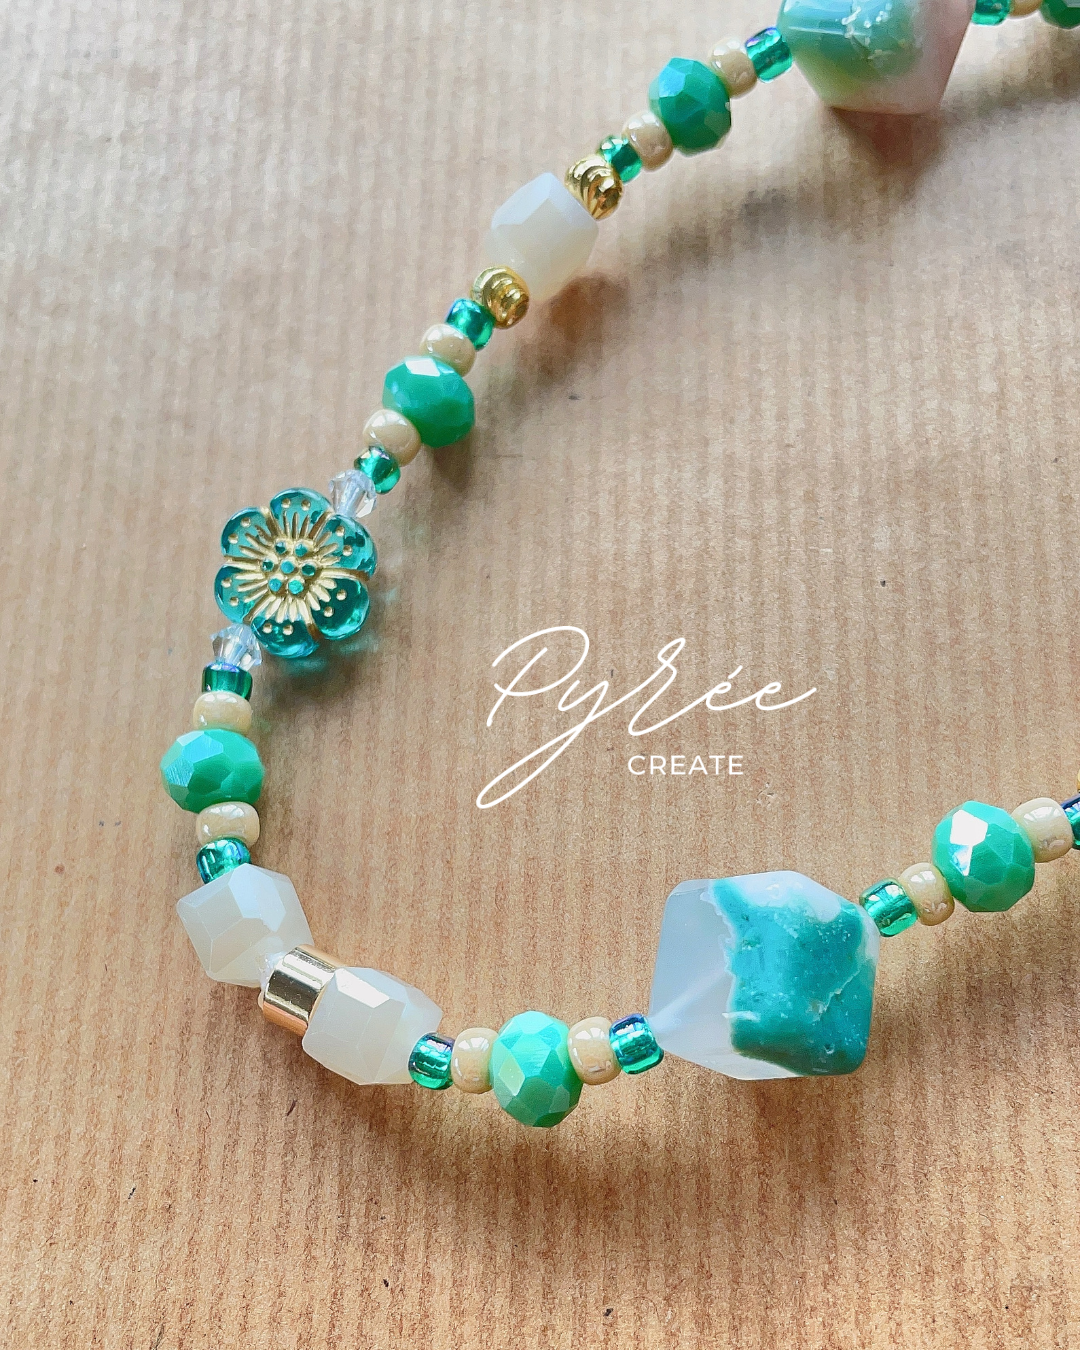 [One & Only] The Painting in Green - Green Flower Agate